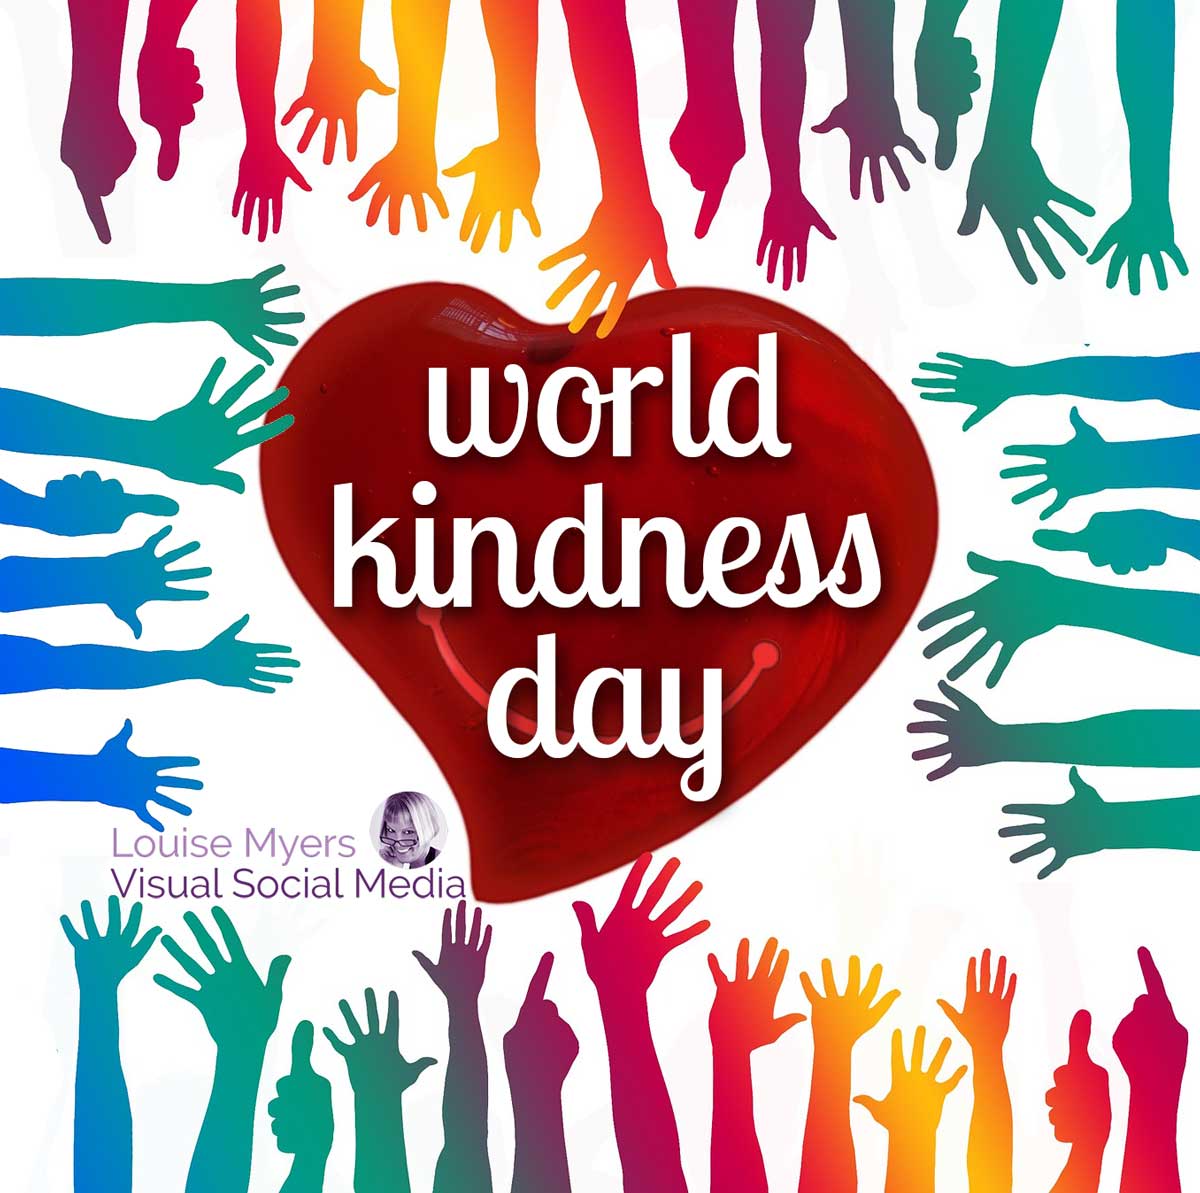 colorful painted hands reaching towards large red heart with script saying world kindness day.